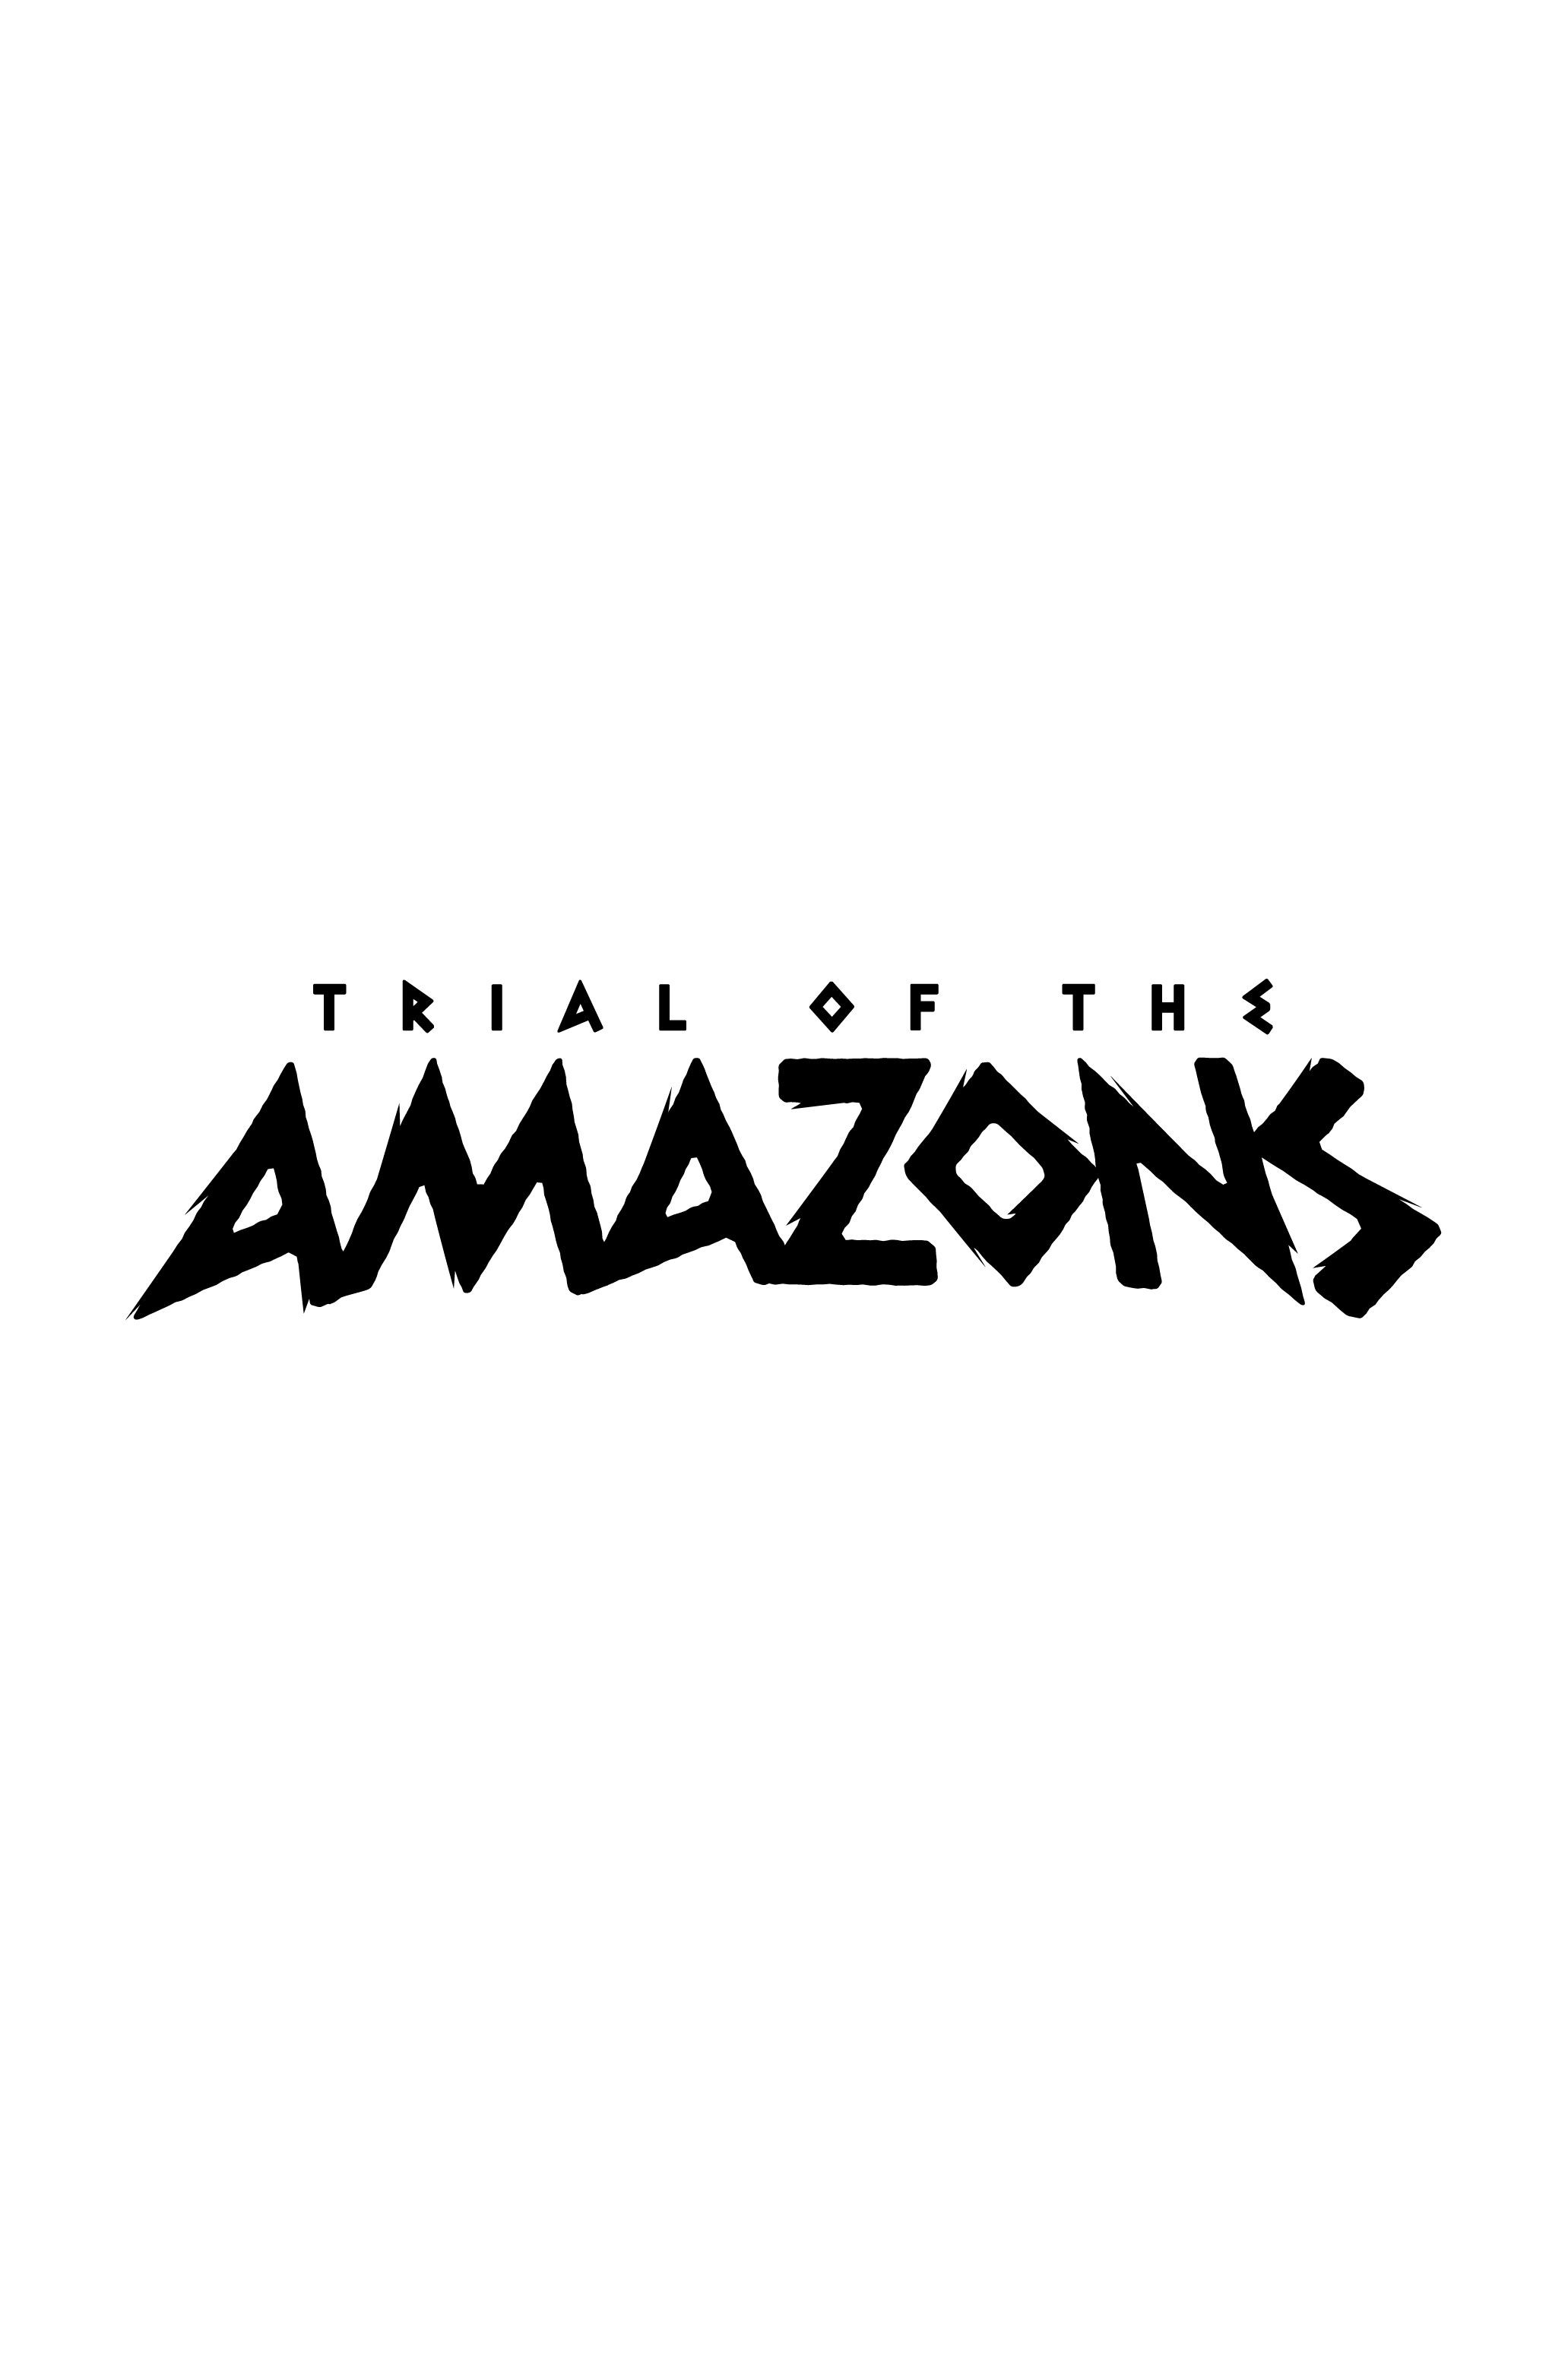 Trial of the Amazons Logo